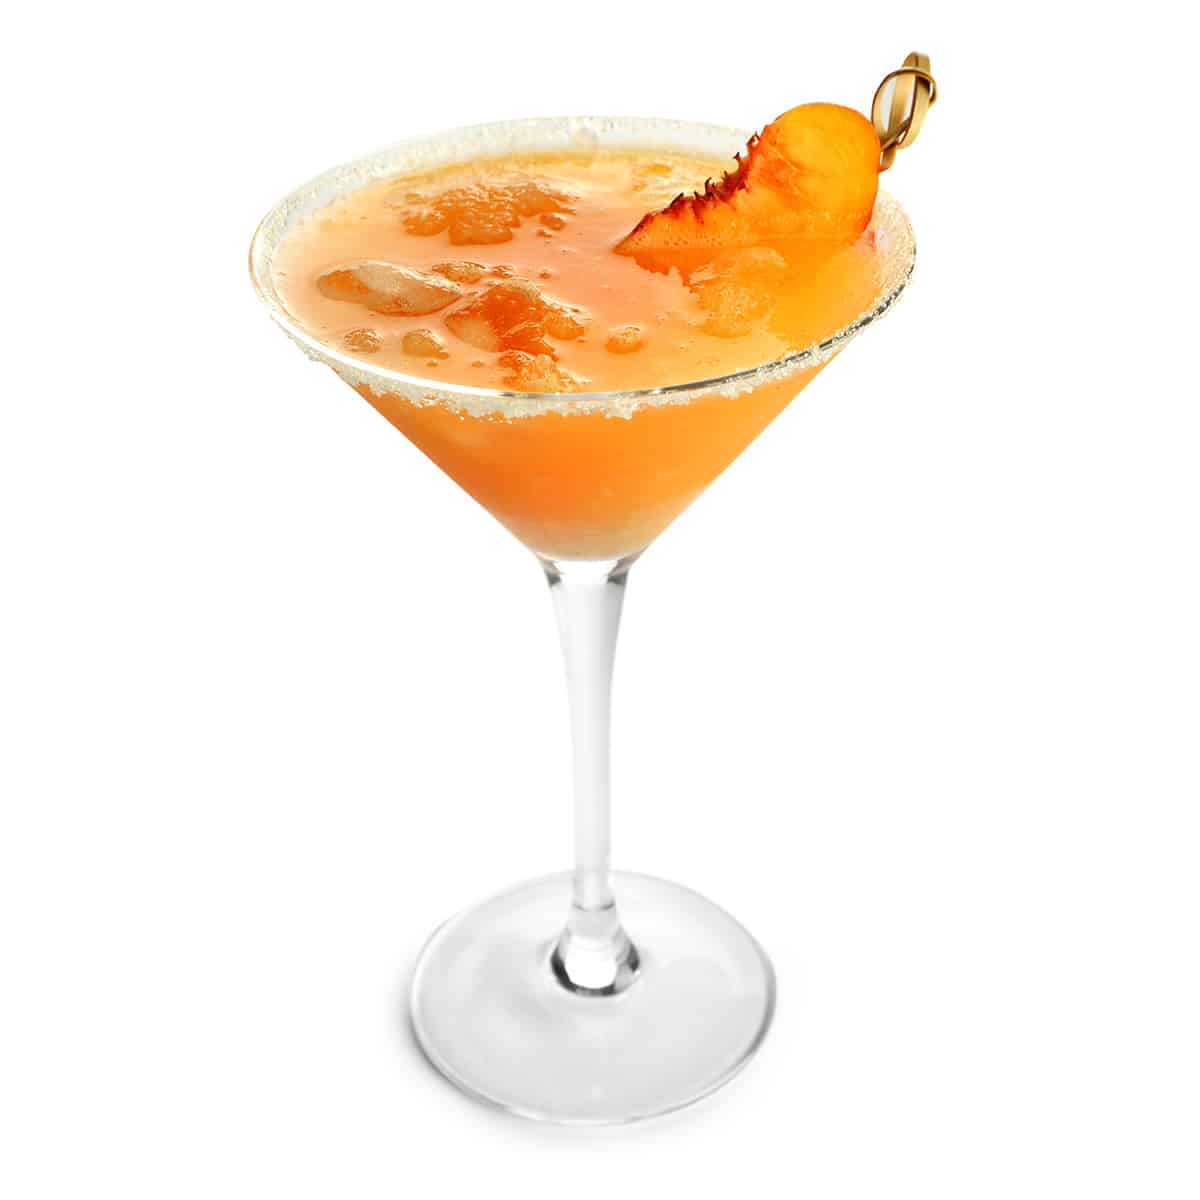 (Out of Season) Rosemary Peach Margarita - 1.5oz Tequila, .75oz Rosemary Peach Syrup, .75oz Lime Juice